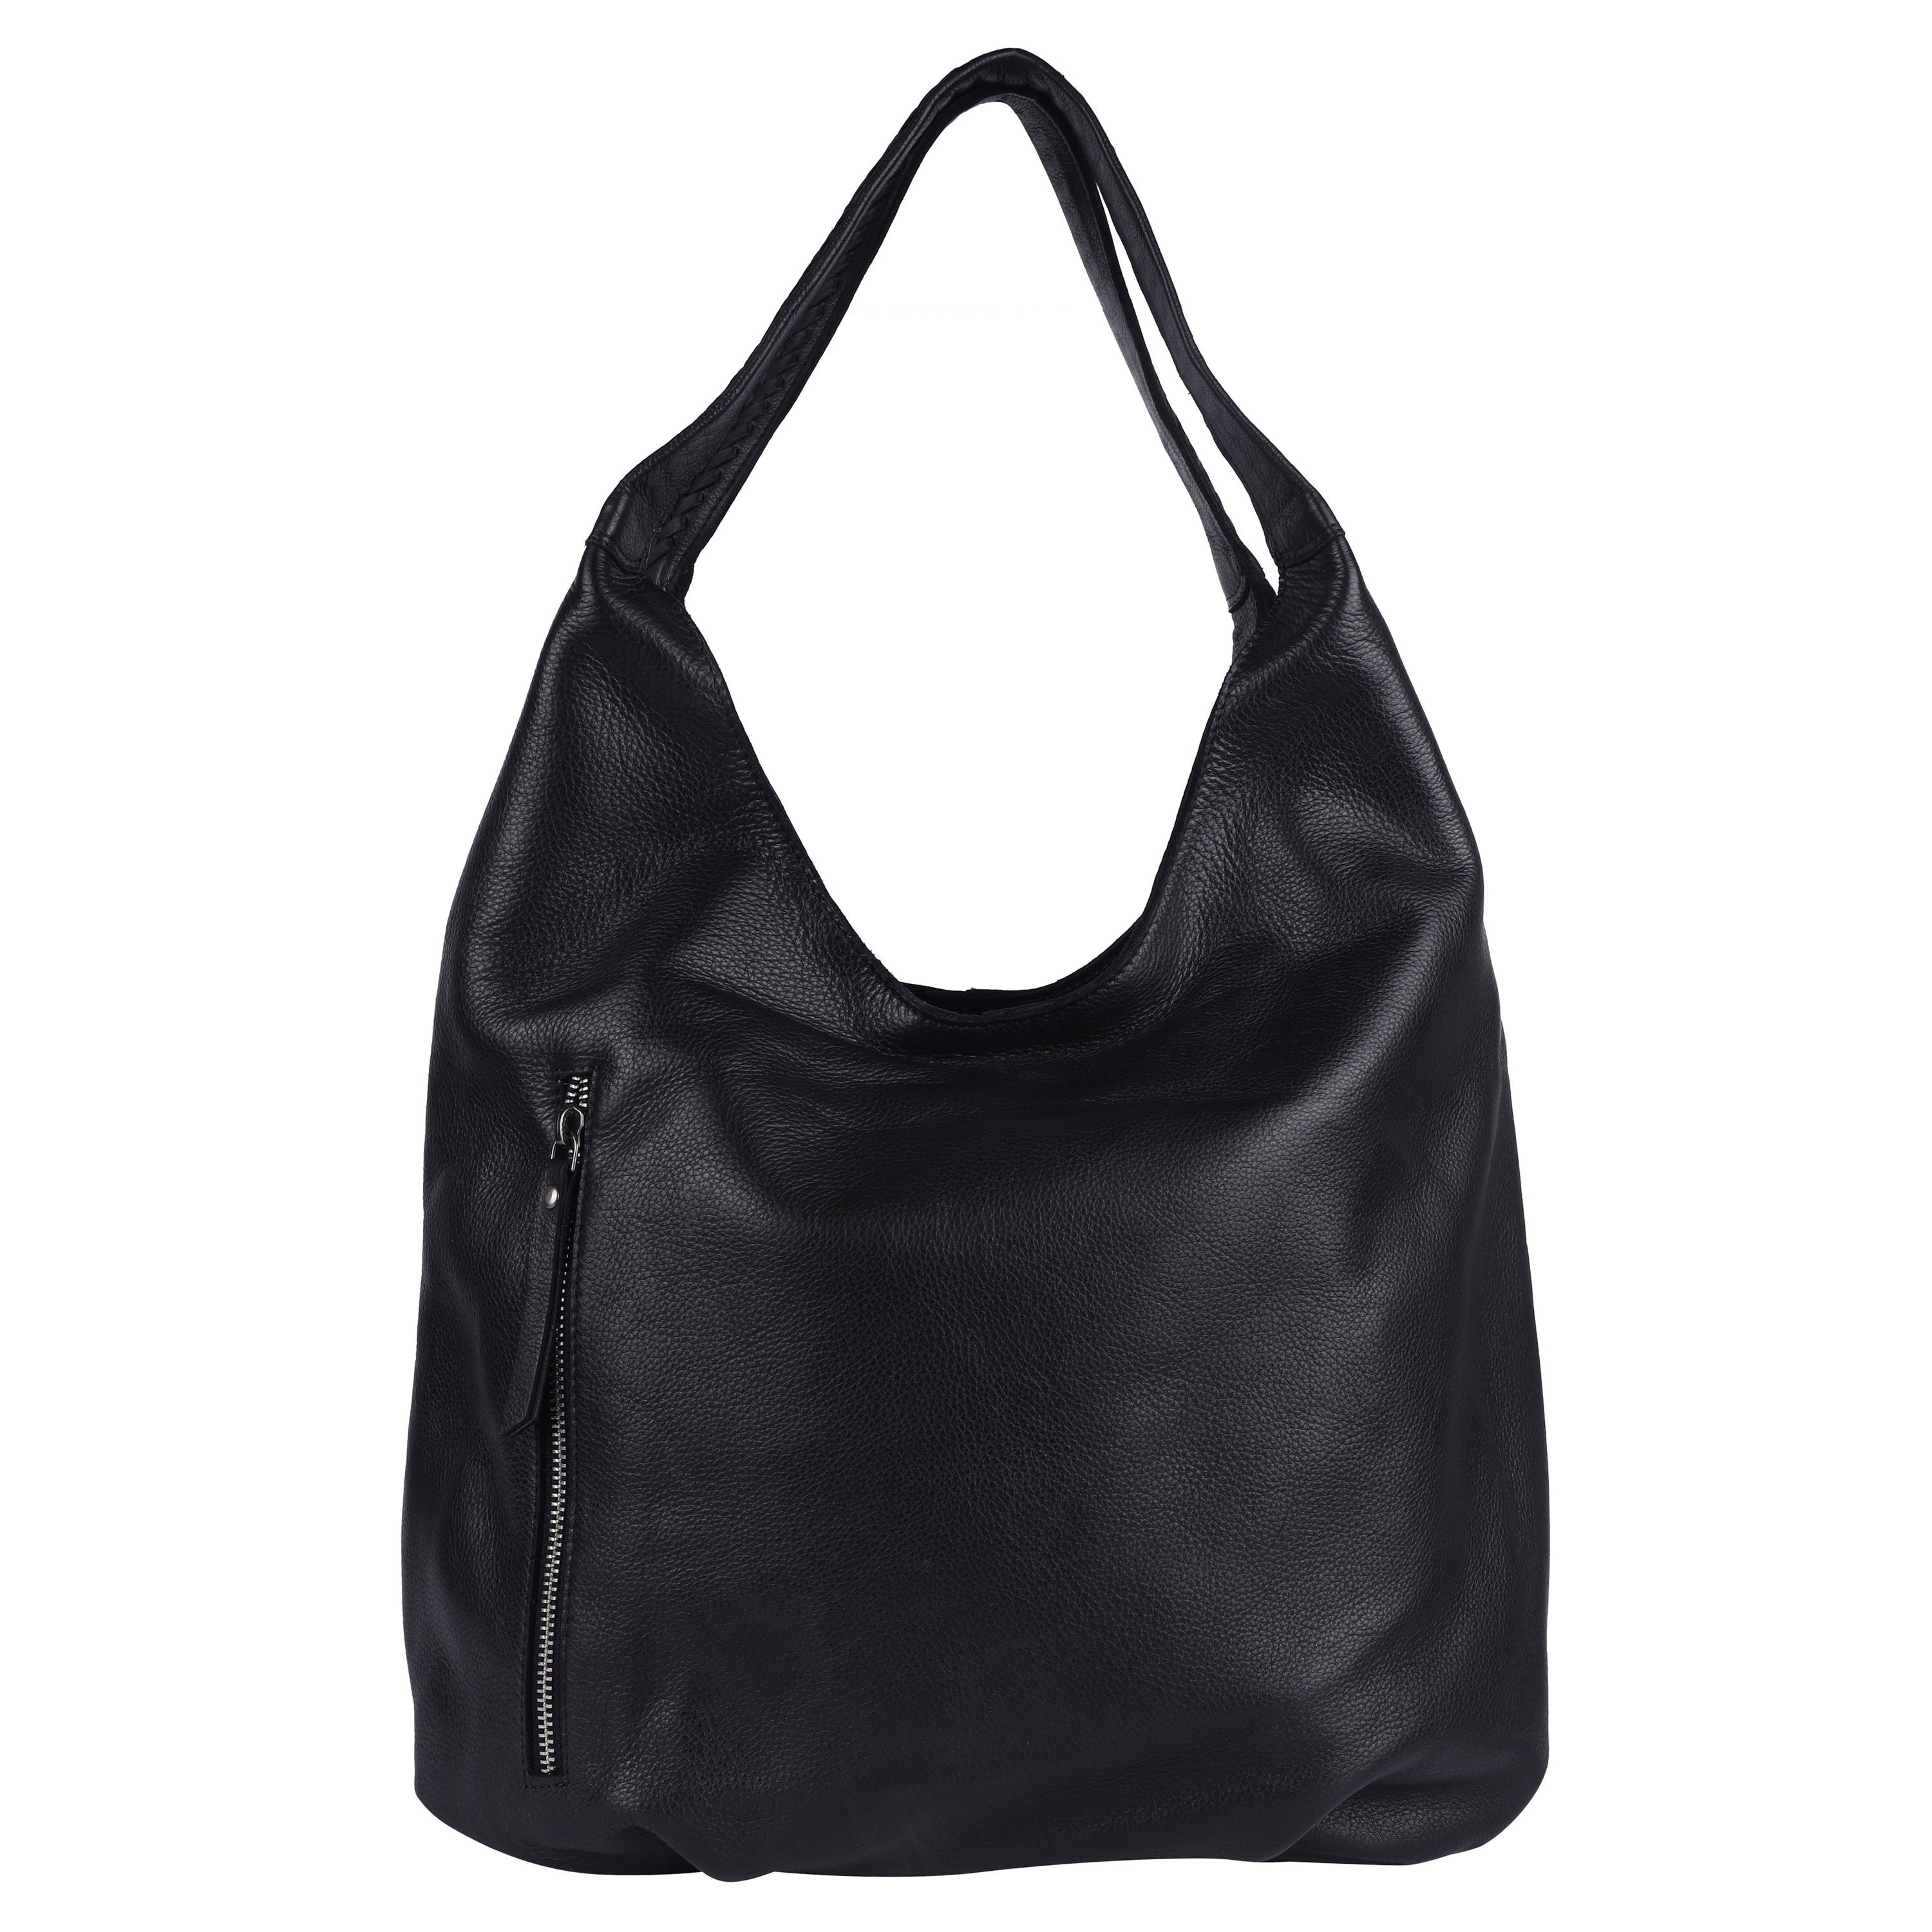 Camila Shoulderbag has recessed top zip entry and 2 carry handles, 1” wide with woven detail - 9” drop